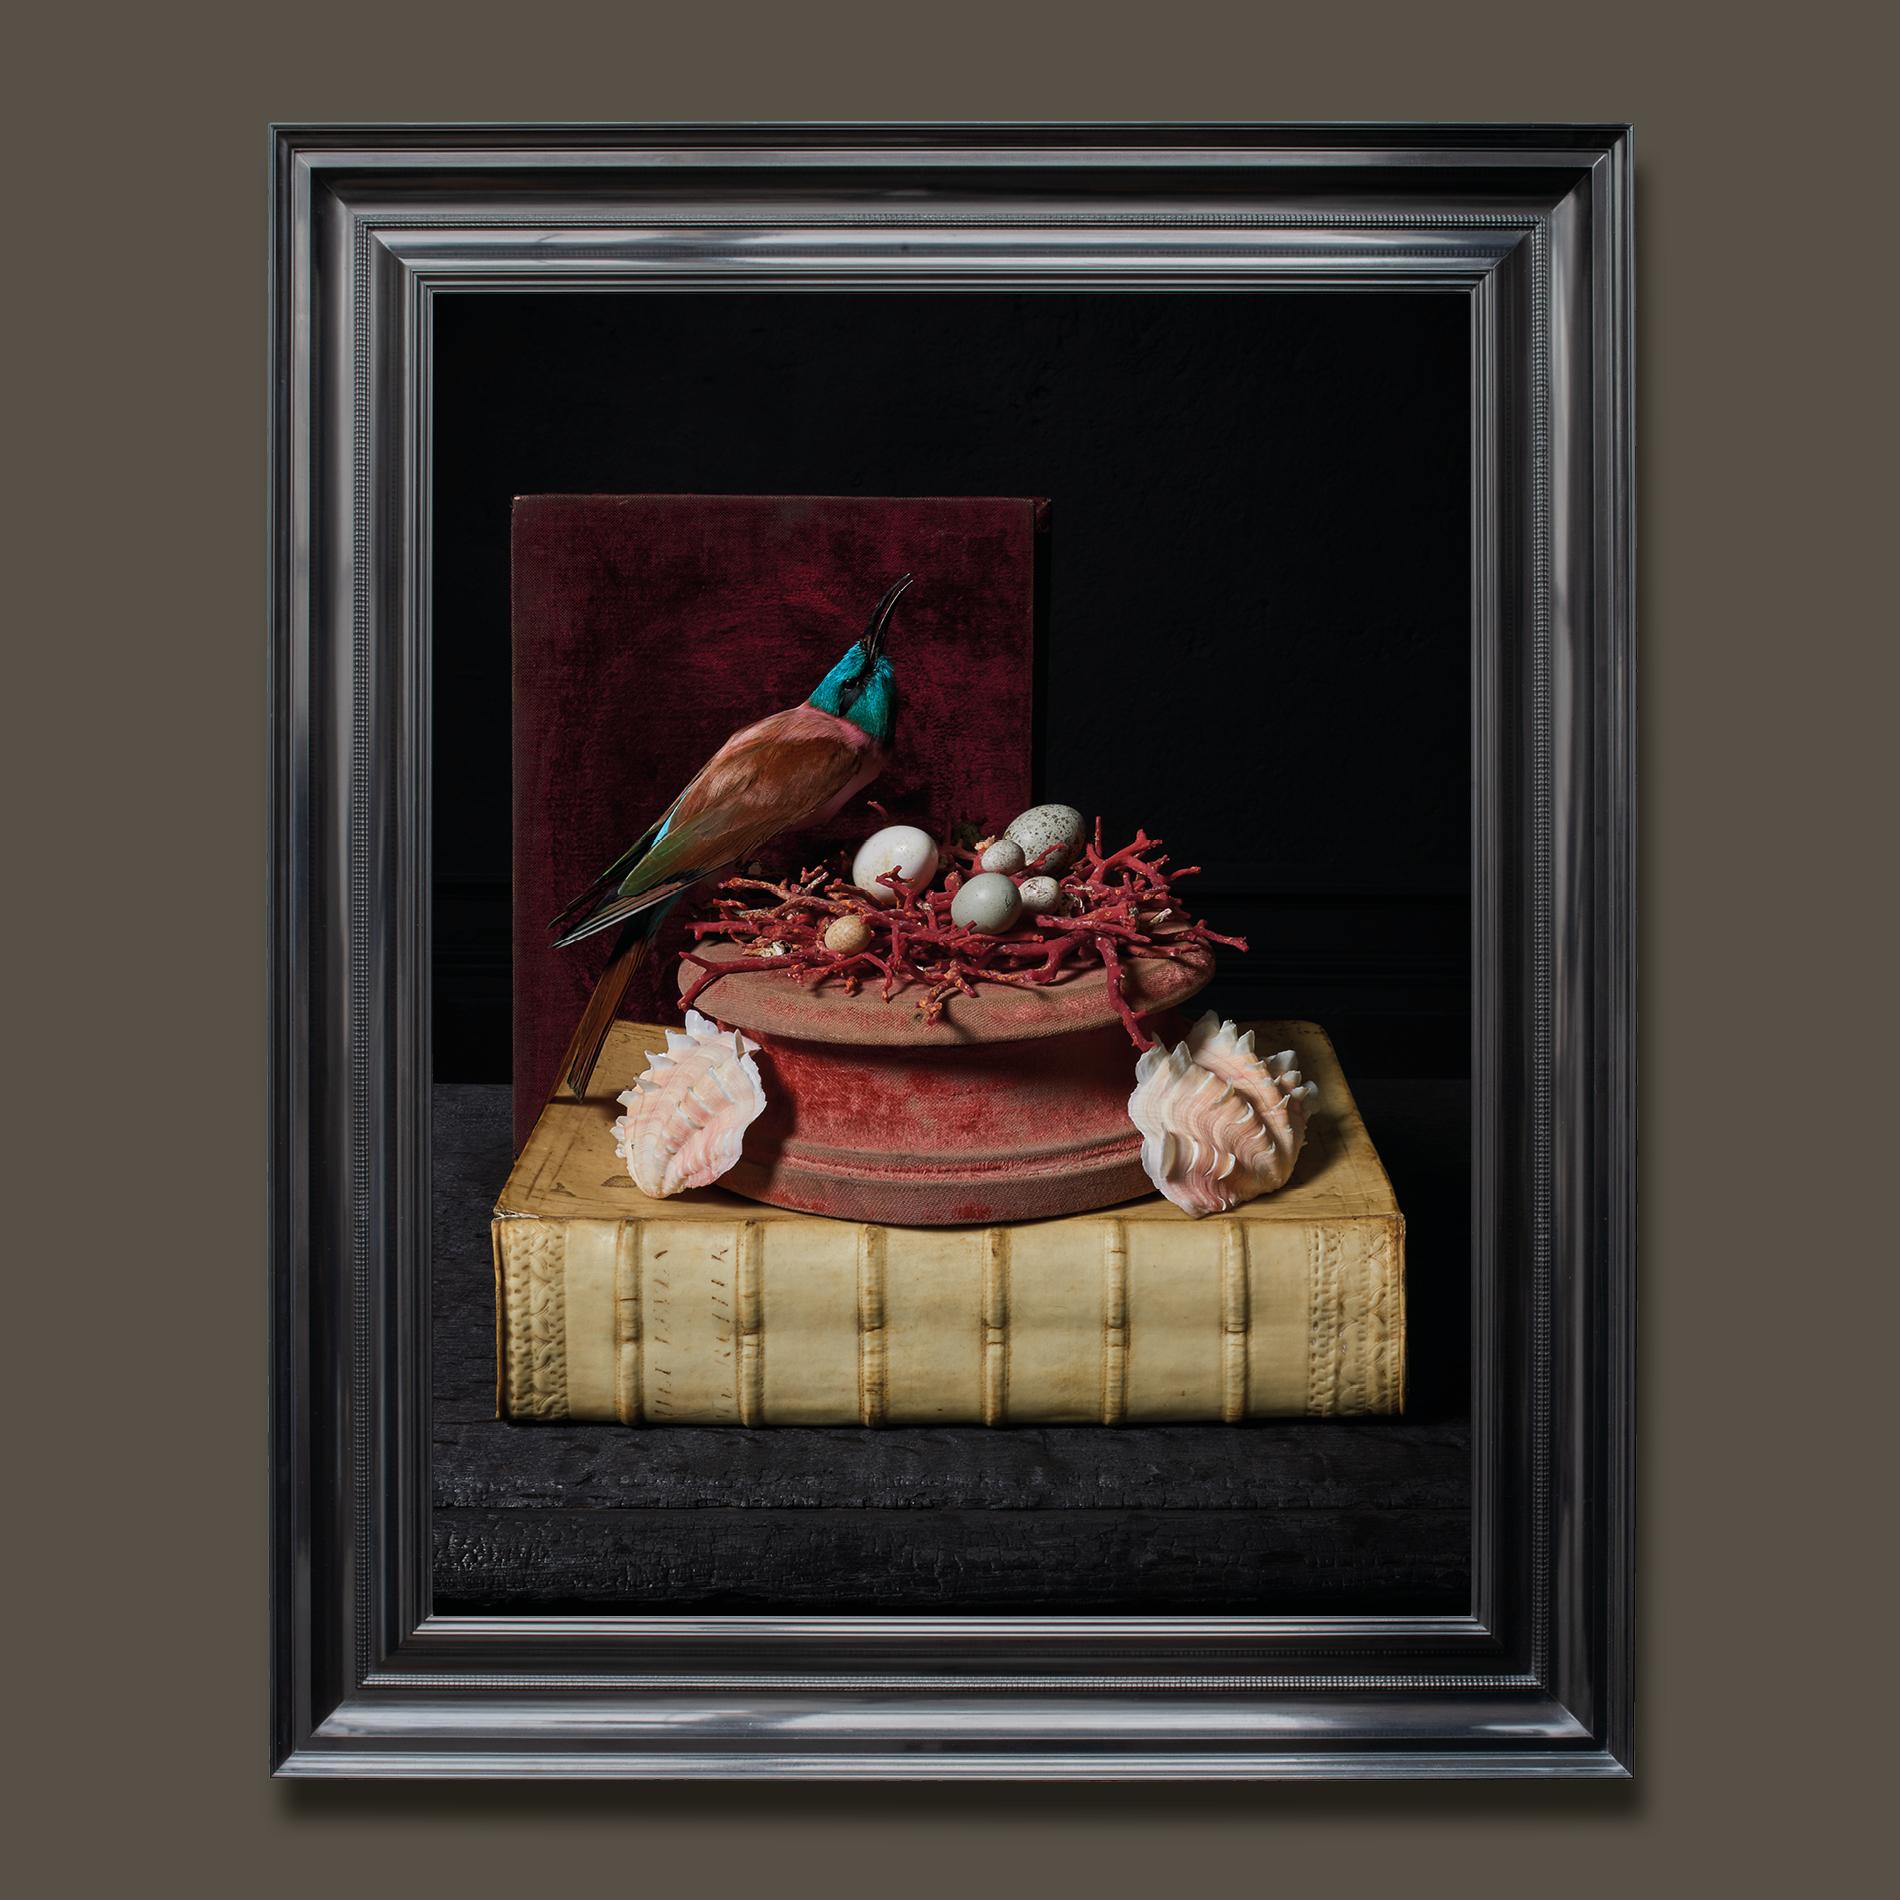 The third series of photographs by fine Taxidermists Sinke & Van Tongeren.

After observing and analysing so many 17th century paintings, they were inspired to create a new series of work focused on still life masterpieces. They chose photography